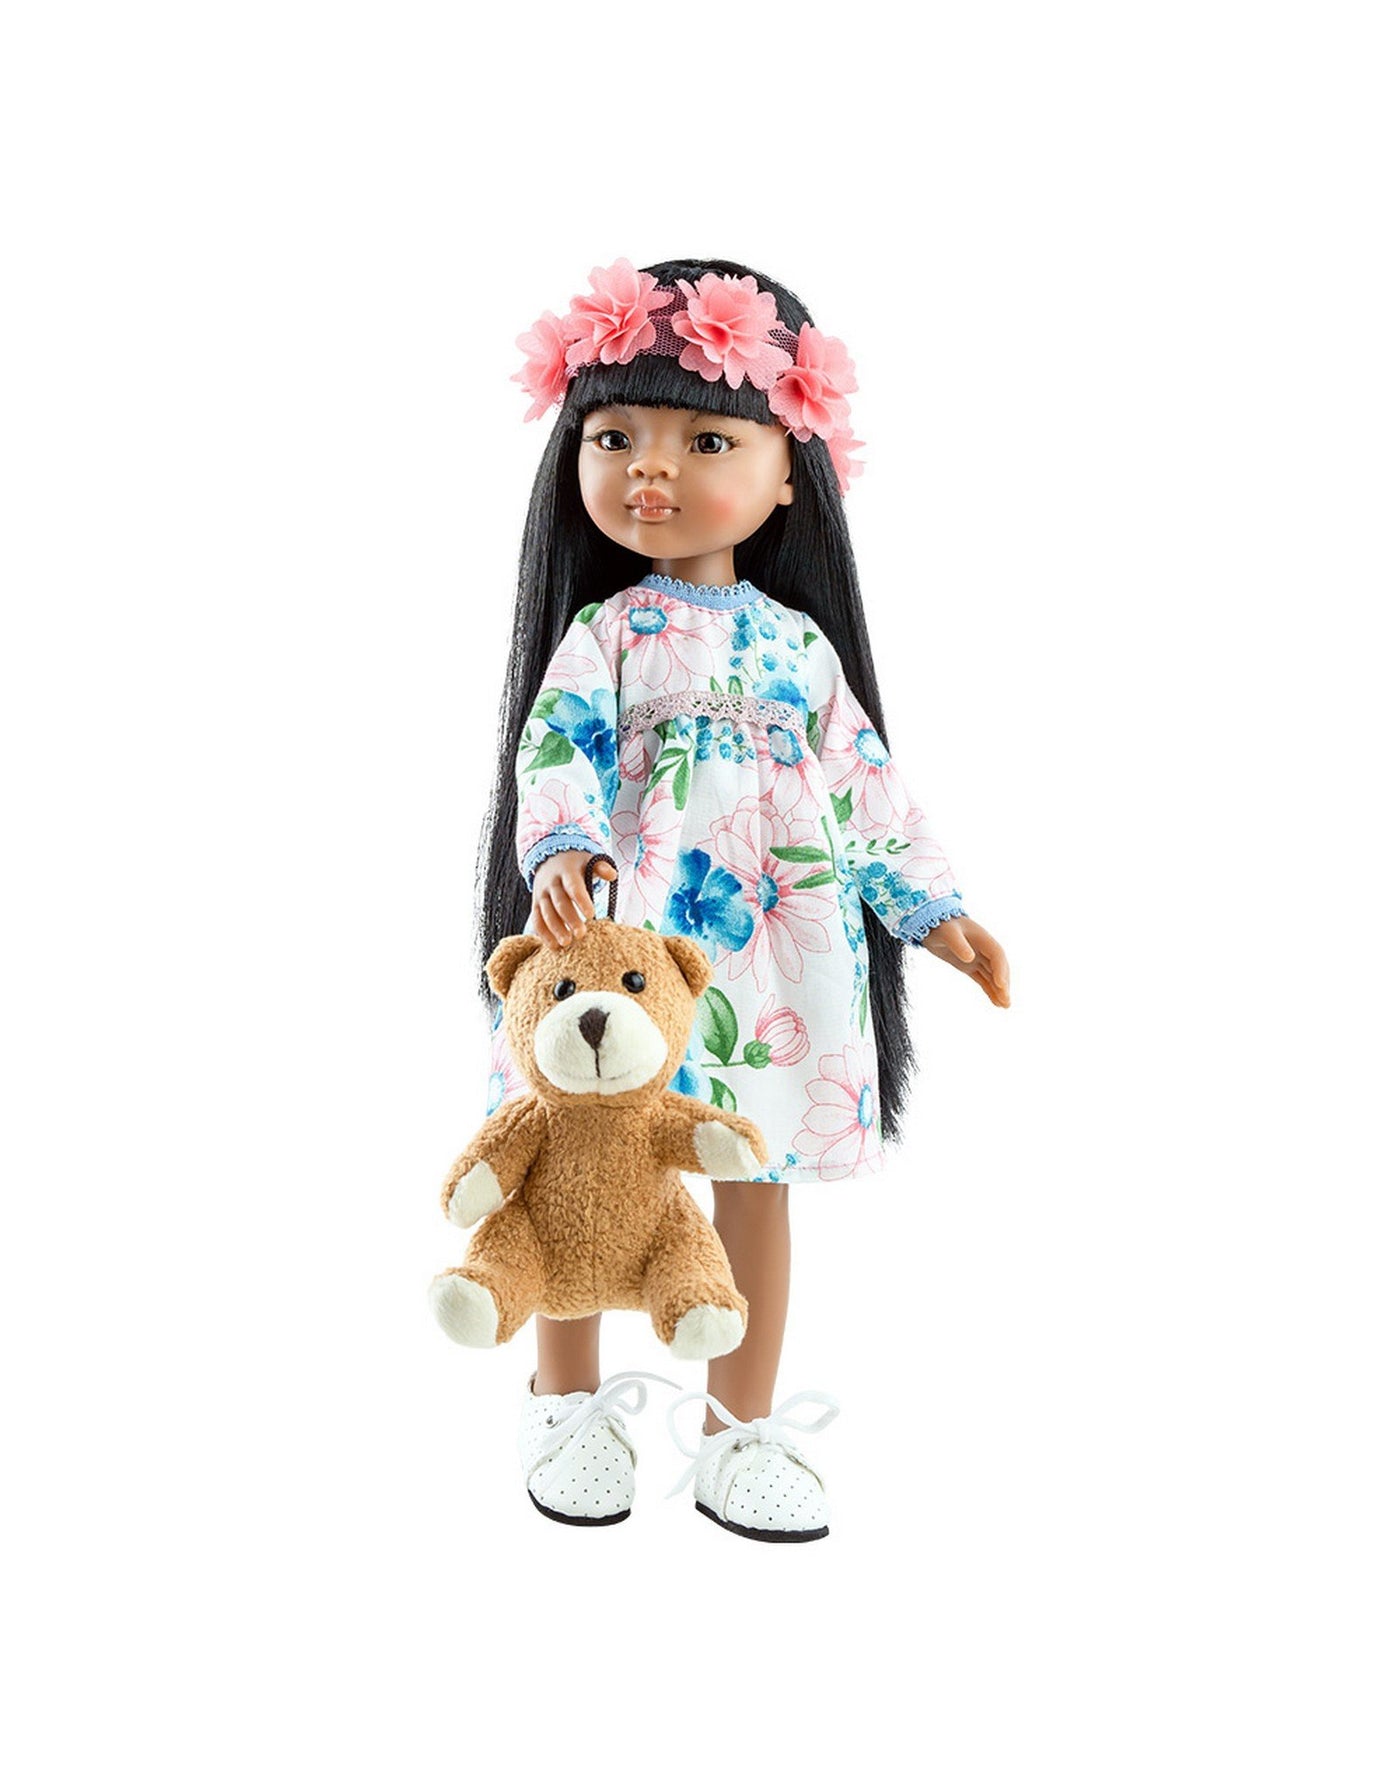 Las Amigas Doll - Meily with white dress with blue flowers and a flower crown - Paola Reina